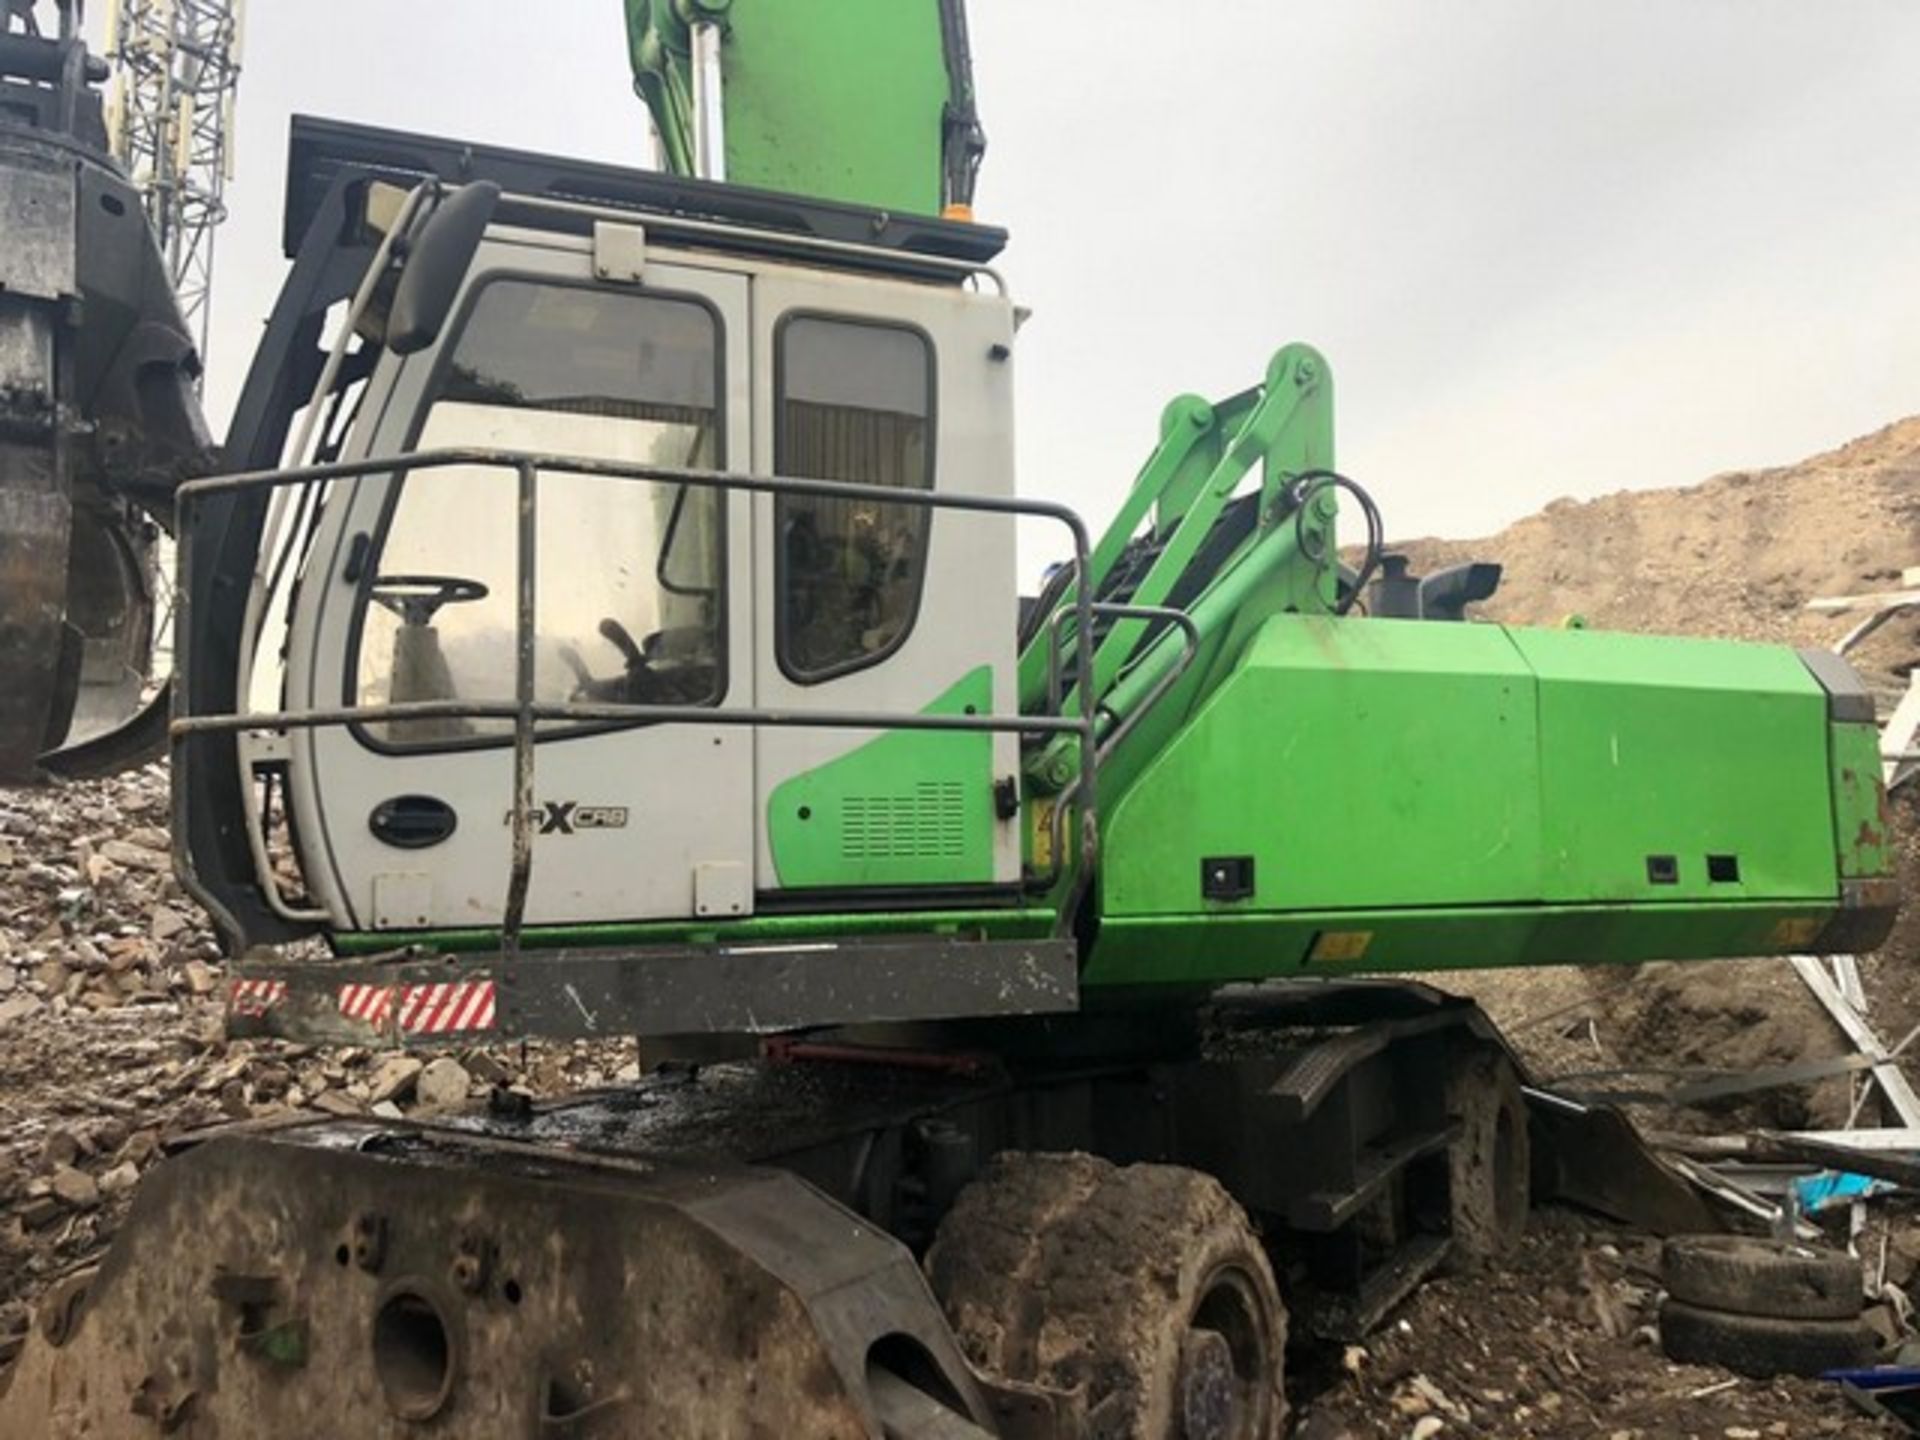 2010 SENNEBOGGEN 830m GREEN LINE MATERIAL HANDLER - 5 TINE GRAB WITH MAGNET GEAR - 14,000 hrs 17M RE - Image 3 of 7